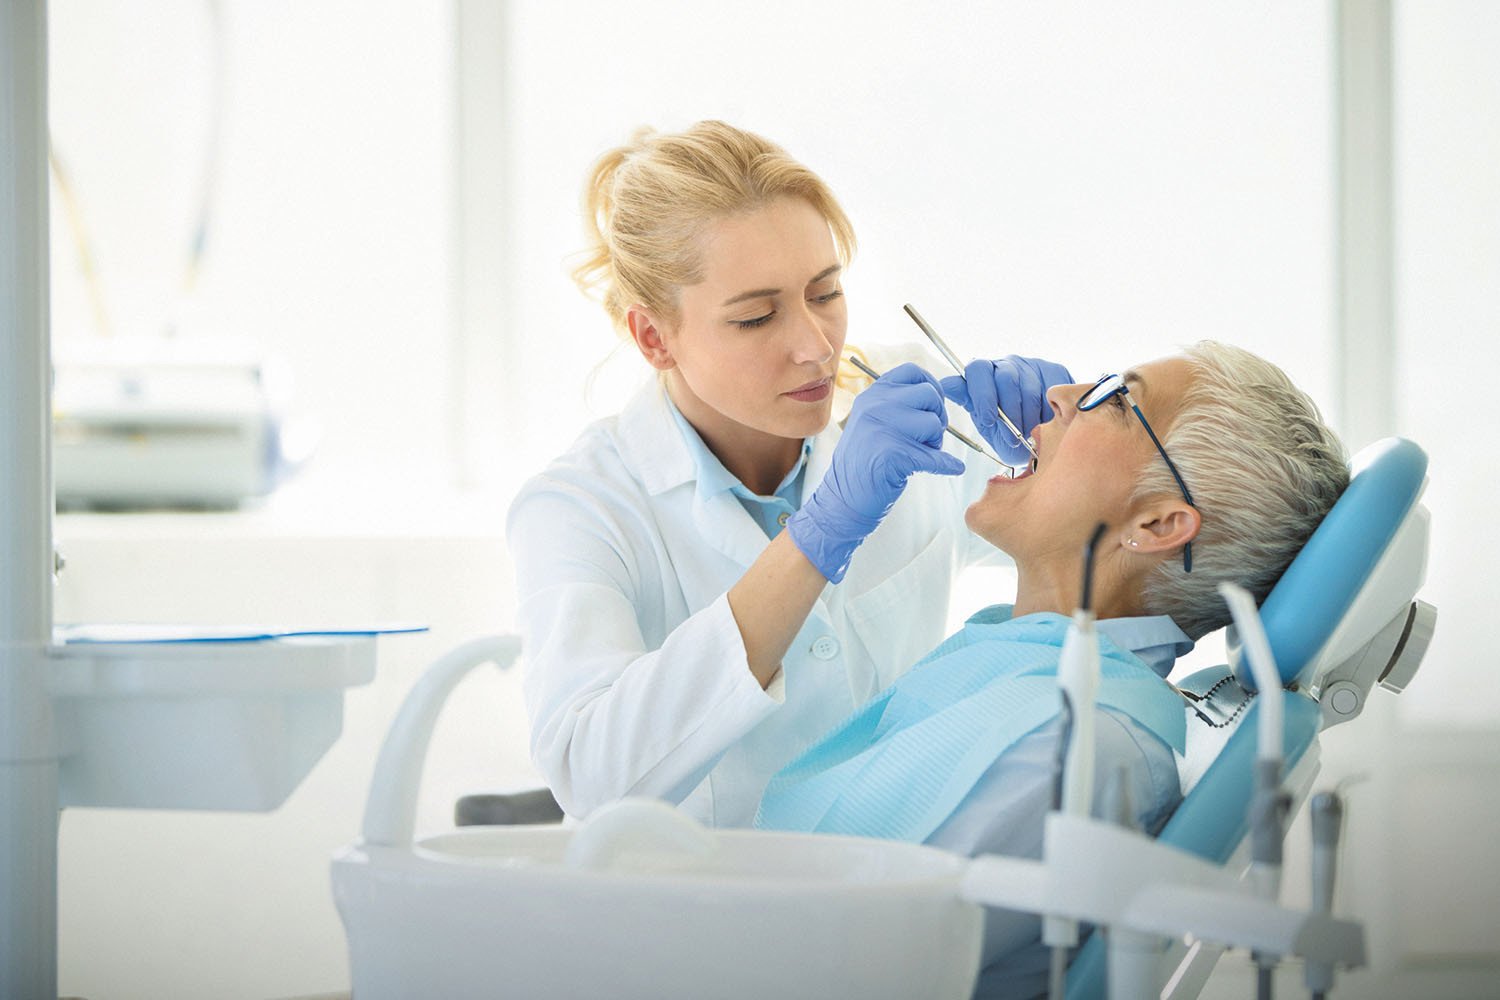 Emergency Dental Clinics in North York: What to Know Before You Go